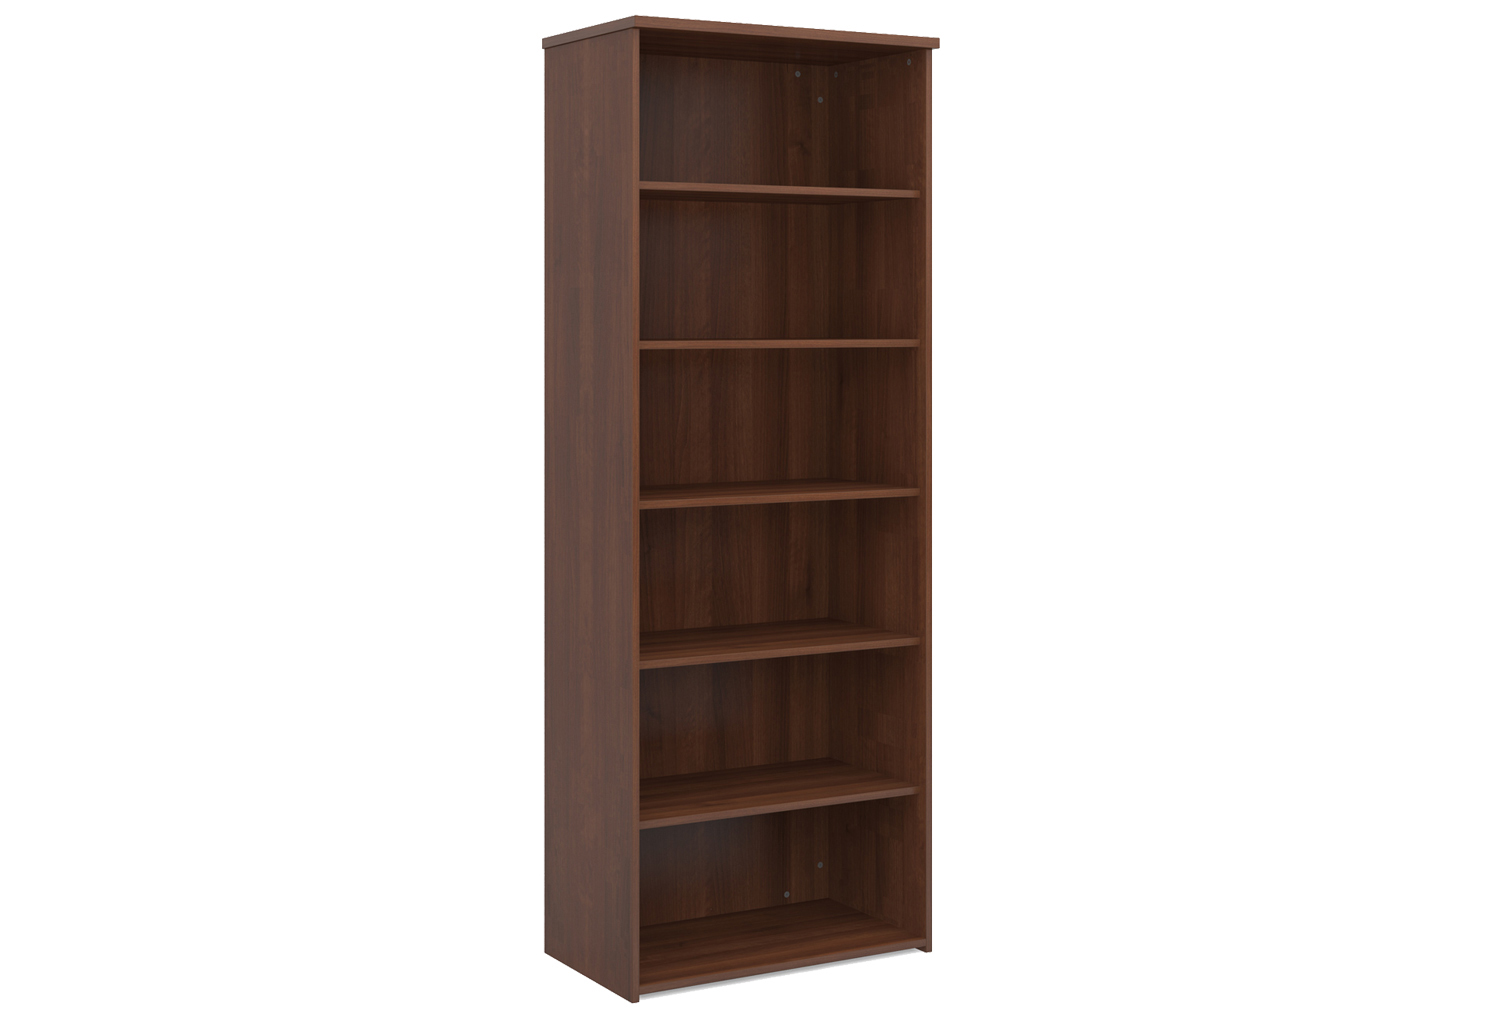 Tully Office Bookcases, 5 Shelf - 80wx47dx214h (cm), Walnut, Fully Installed